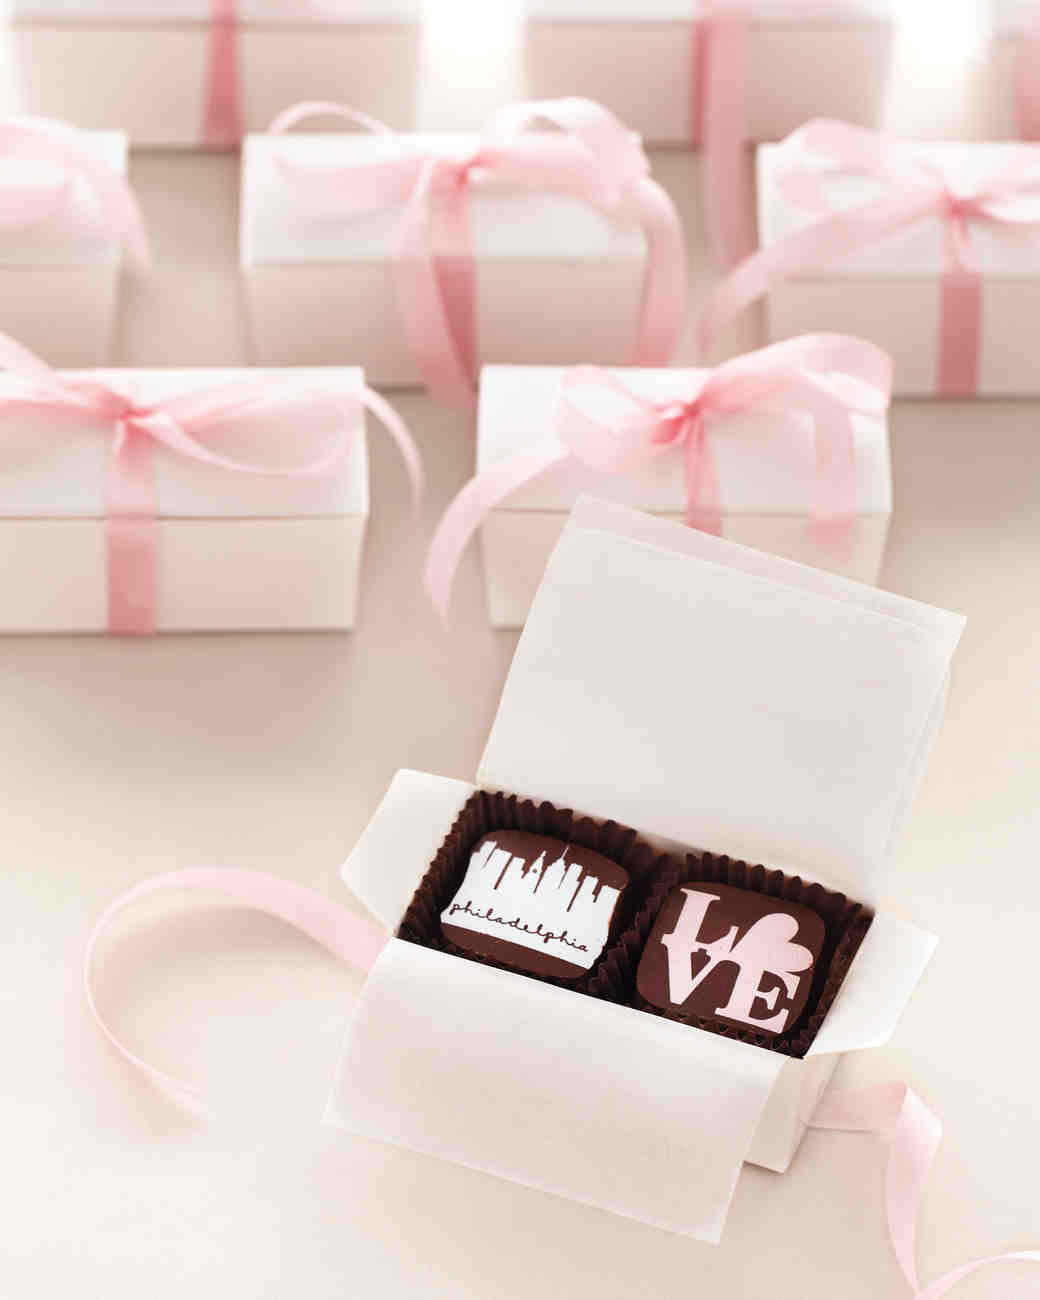 Wedding Chocolate Favors
 26 Chocolate Wedding Favors That Are Too Sweet To Pass Up